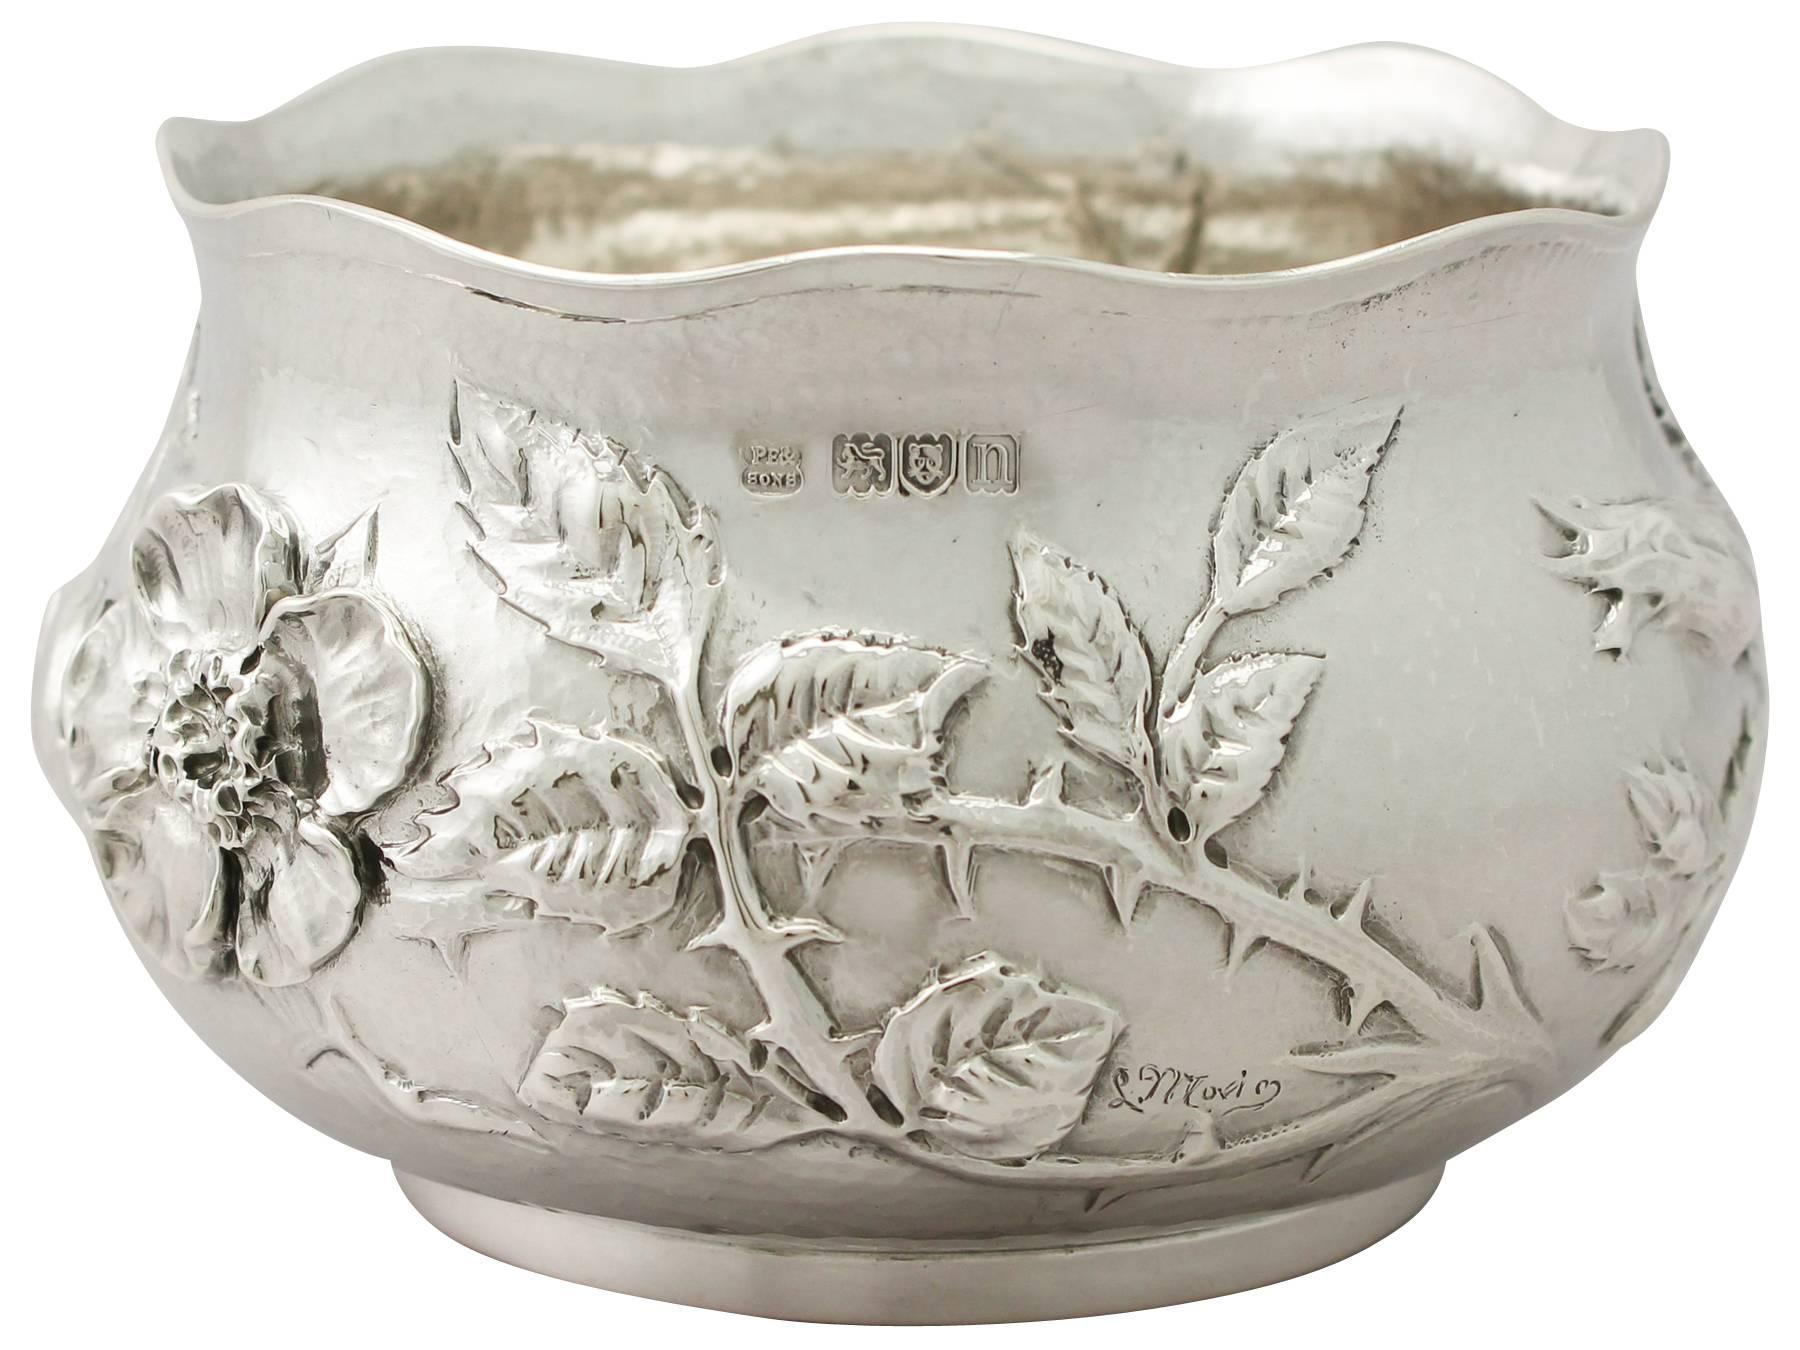 An exceptional, fine and impressive antique Edwardian English sterling silver bowl designed by Latino Movio in the Arts and Crafts style; an addition to our range of collectable silverware.

This exceptional antique Edwardian sterling silver bowl